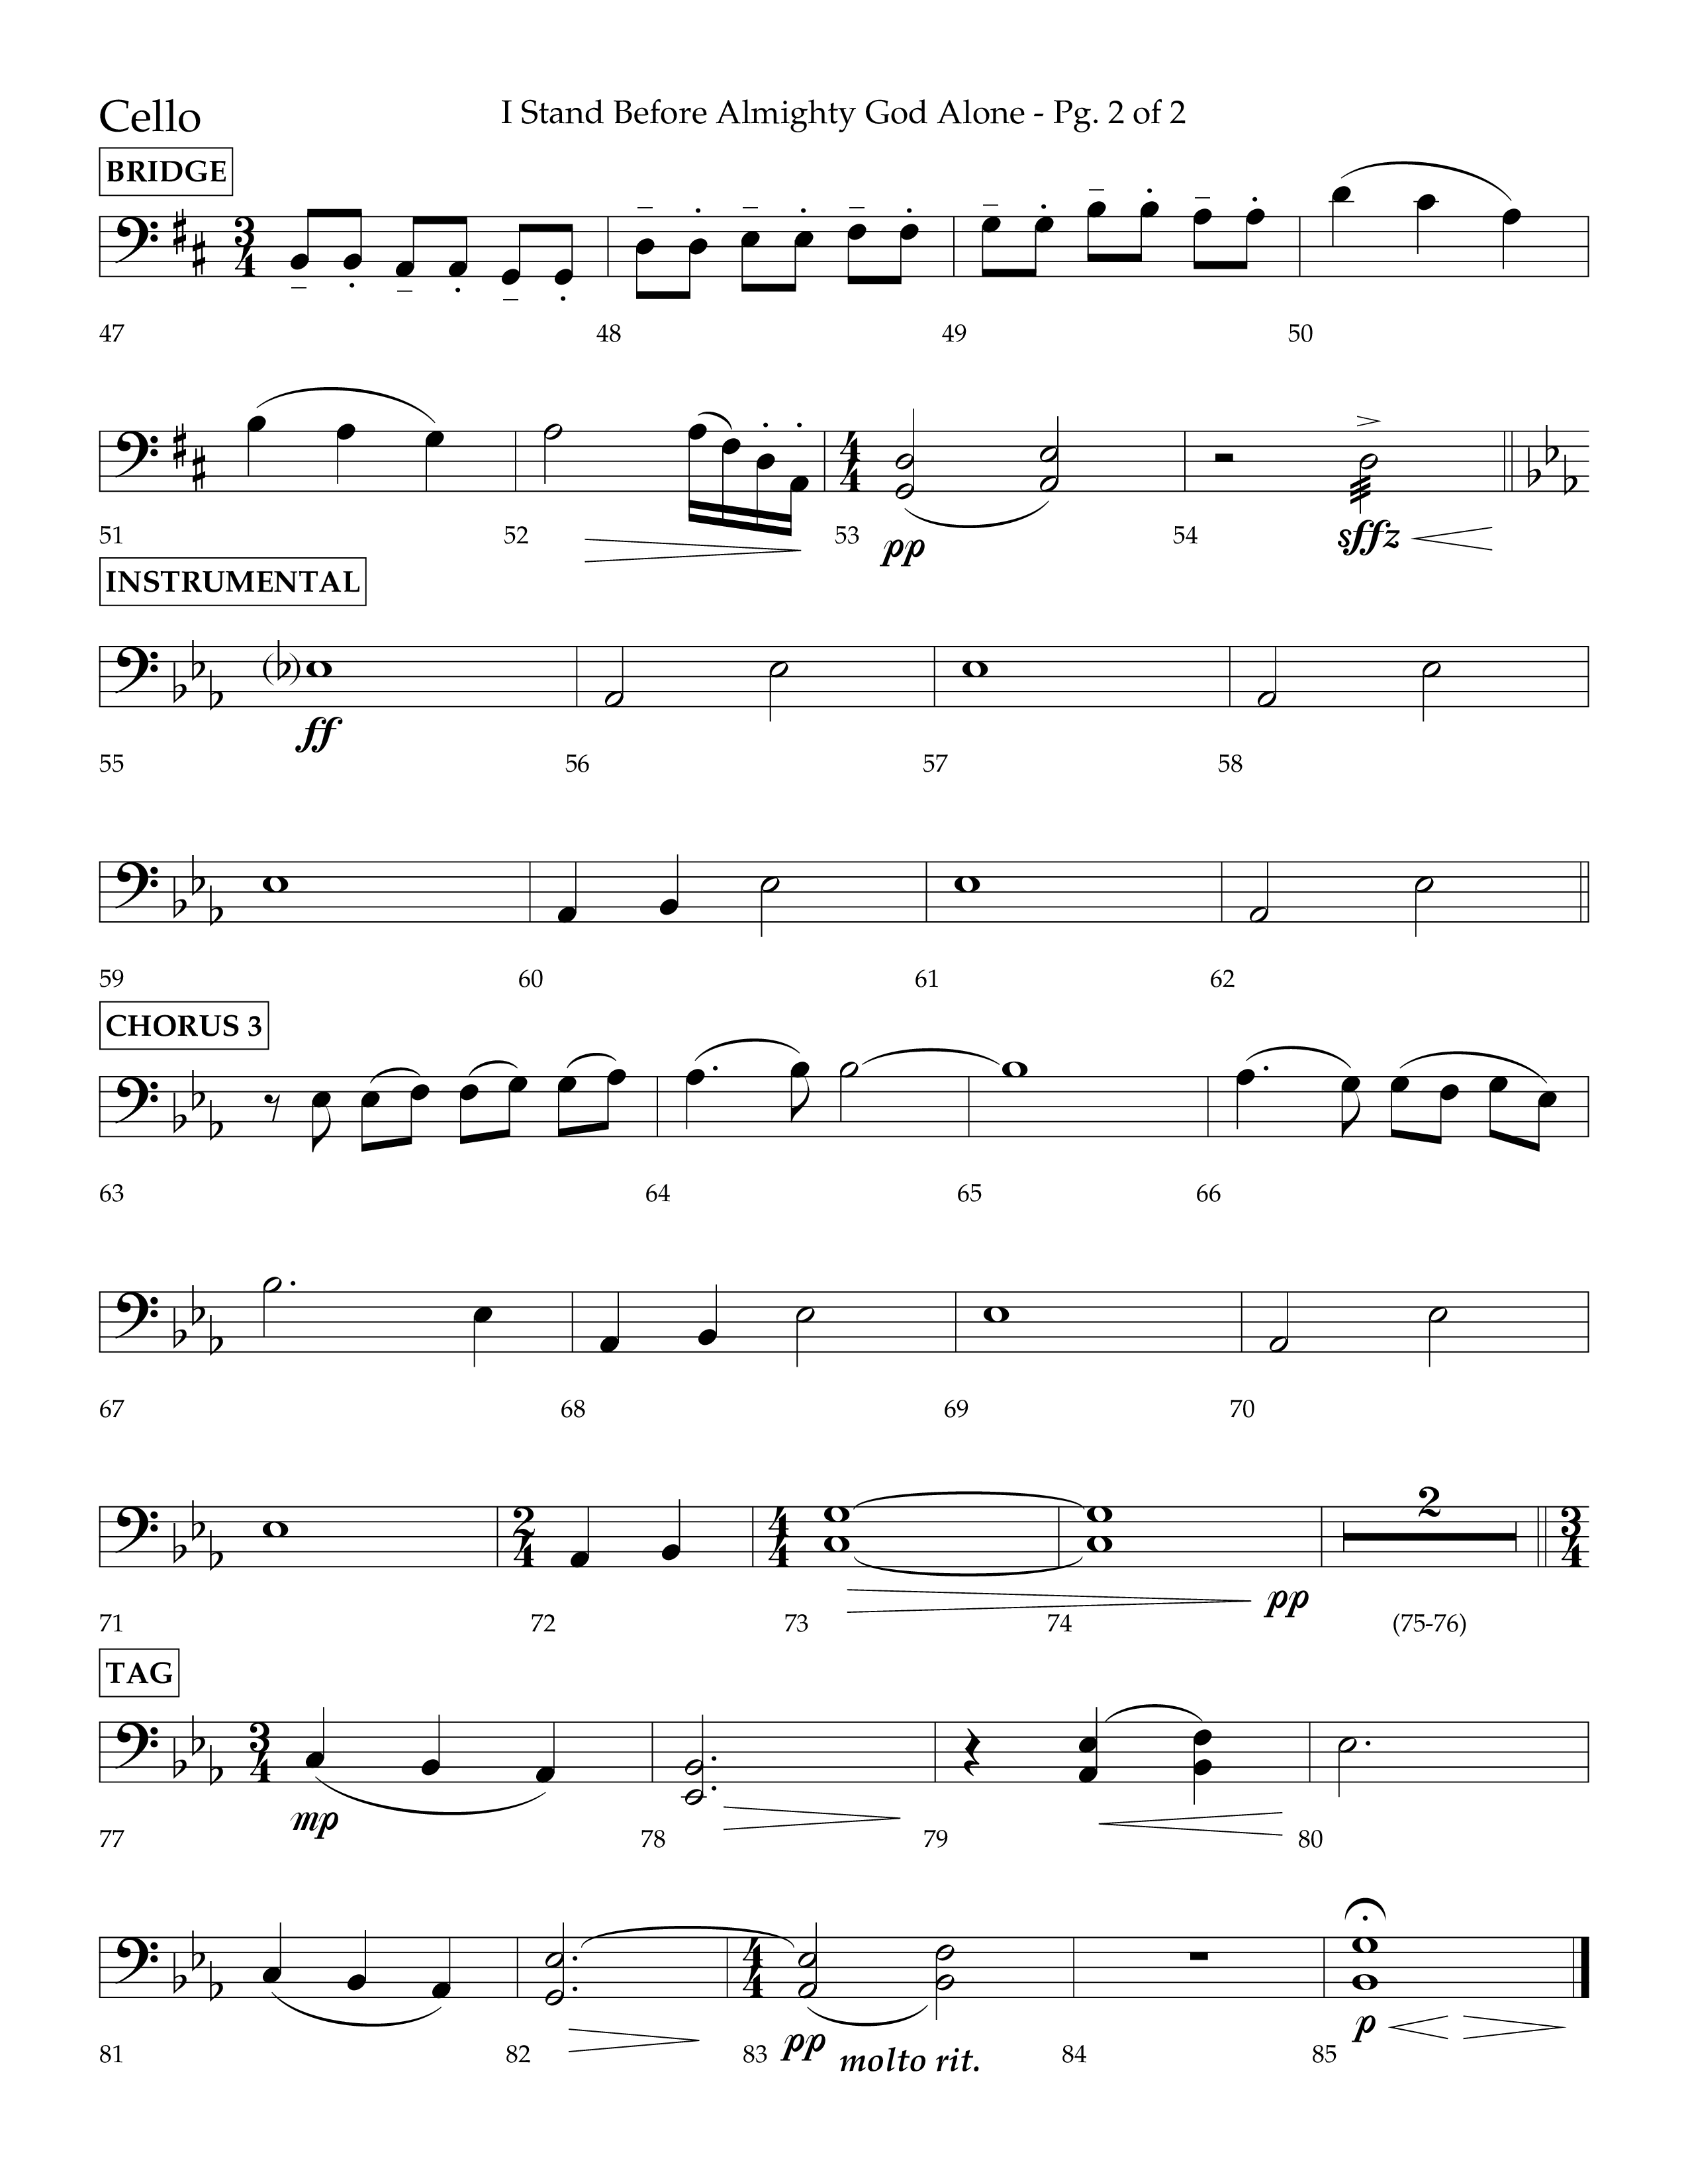 I Stand Before Almighty God Alone (Choral Anthem SATB) Cello (Lifeway Choral / Arr. Craig Adams / Orch. Phillip Keveren)